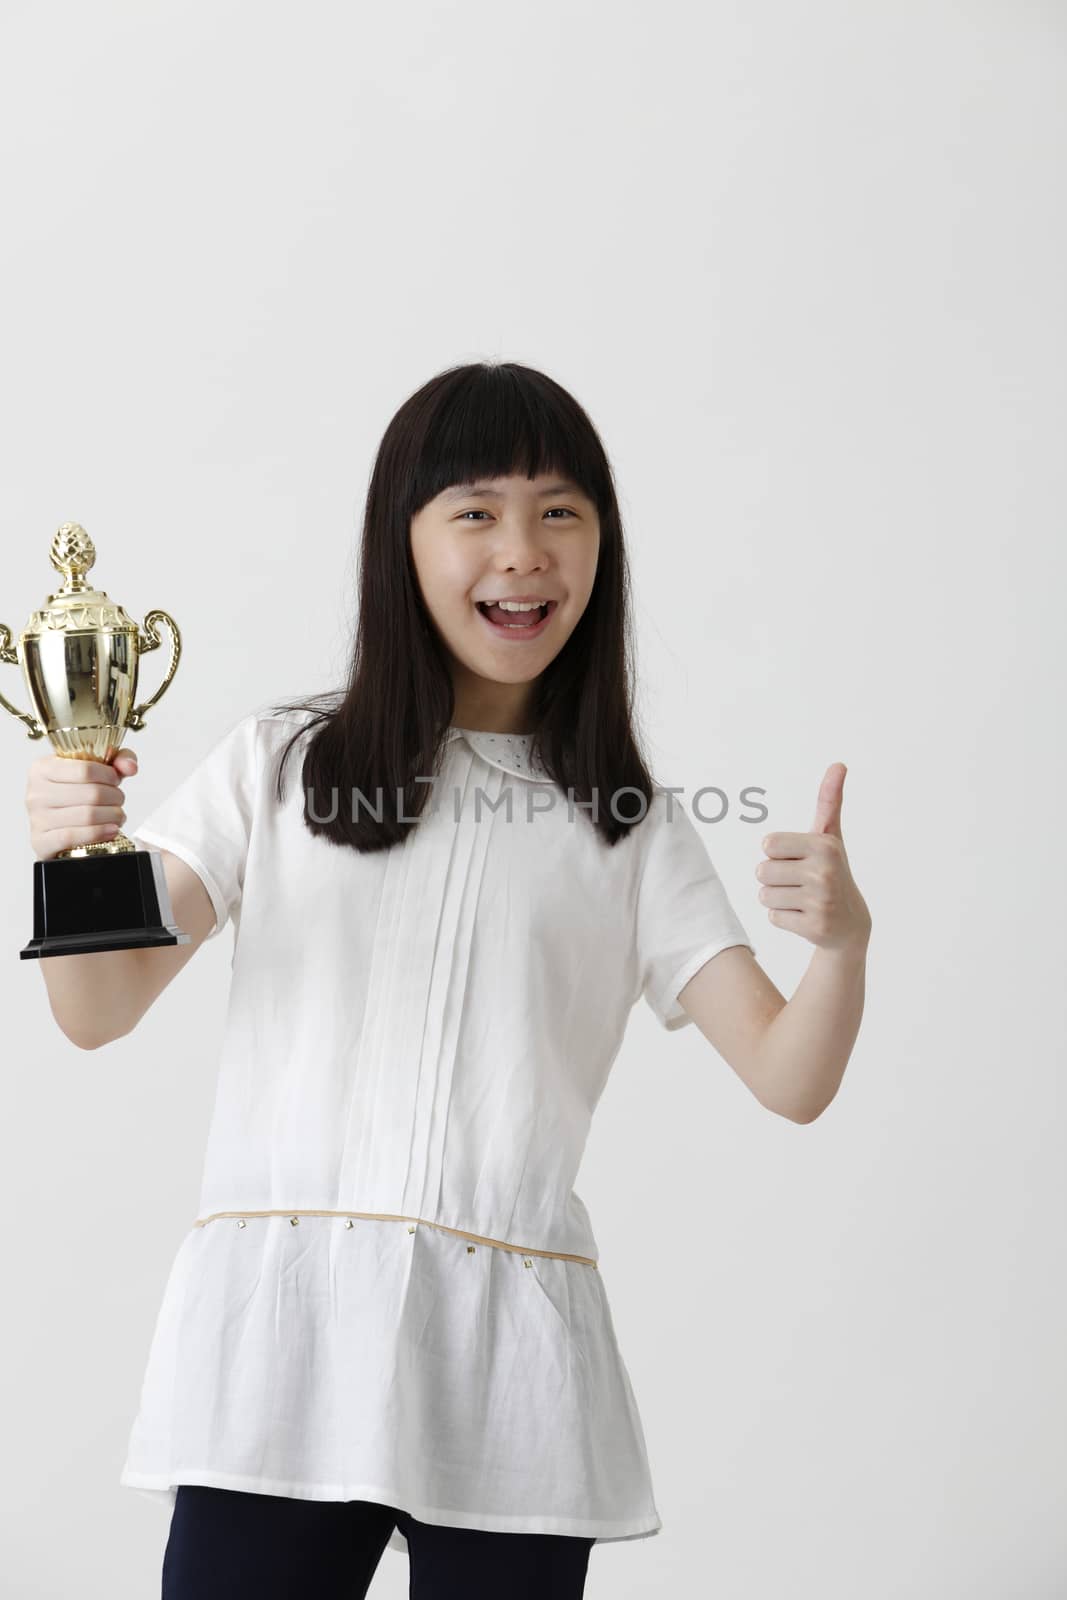 chinese girl holding trophy and with thumb up